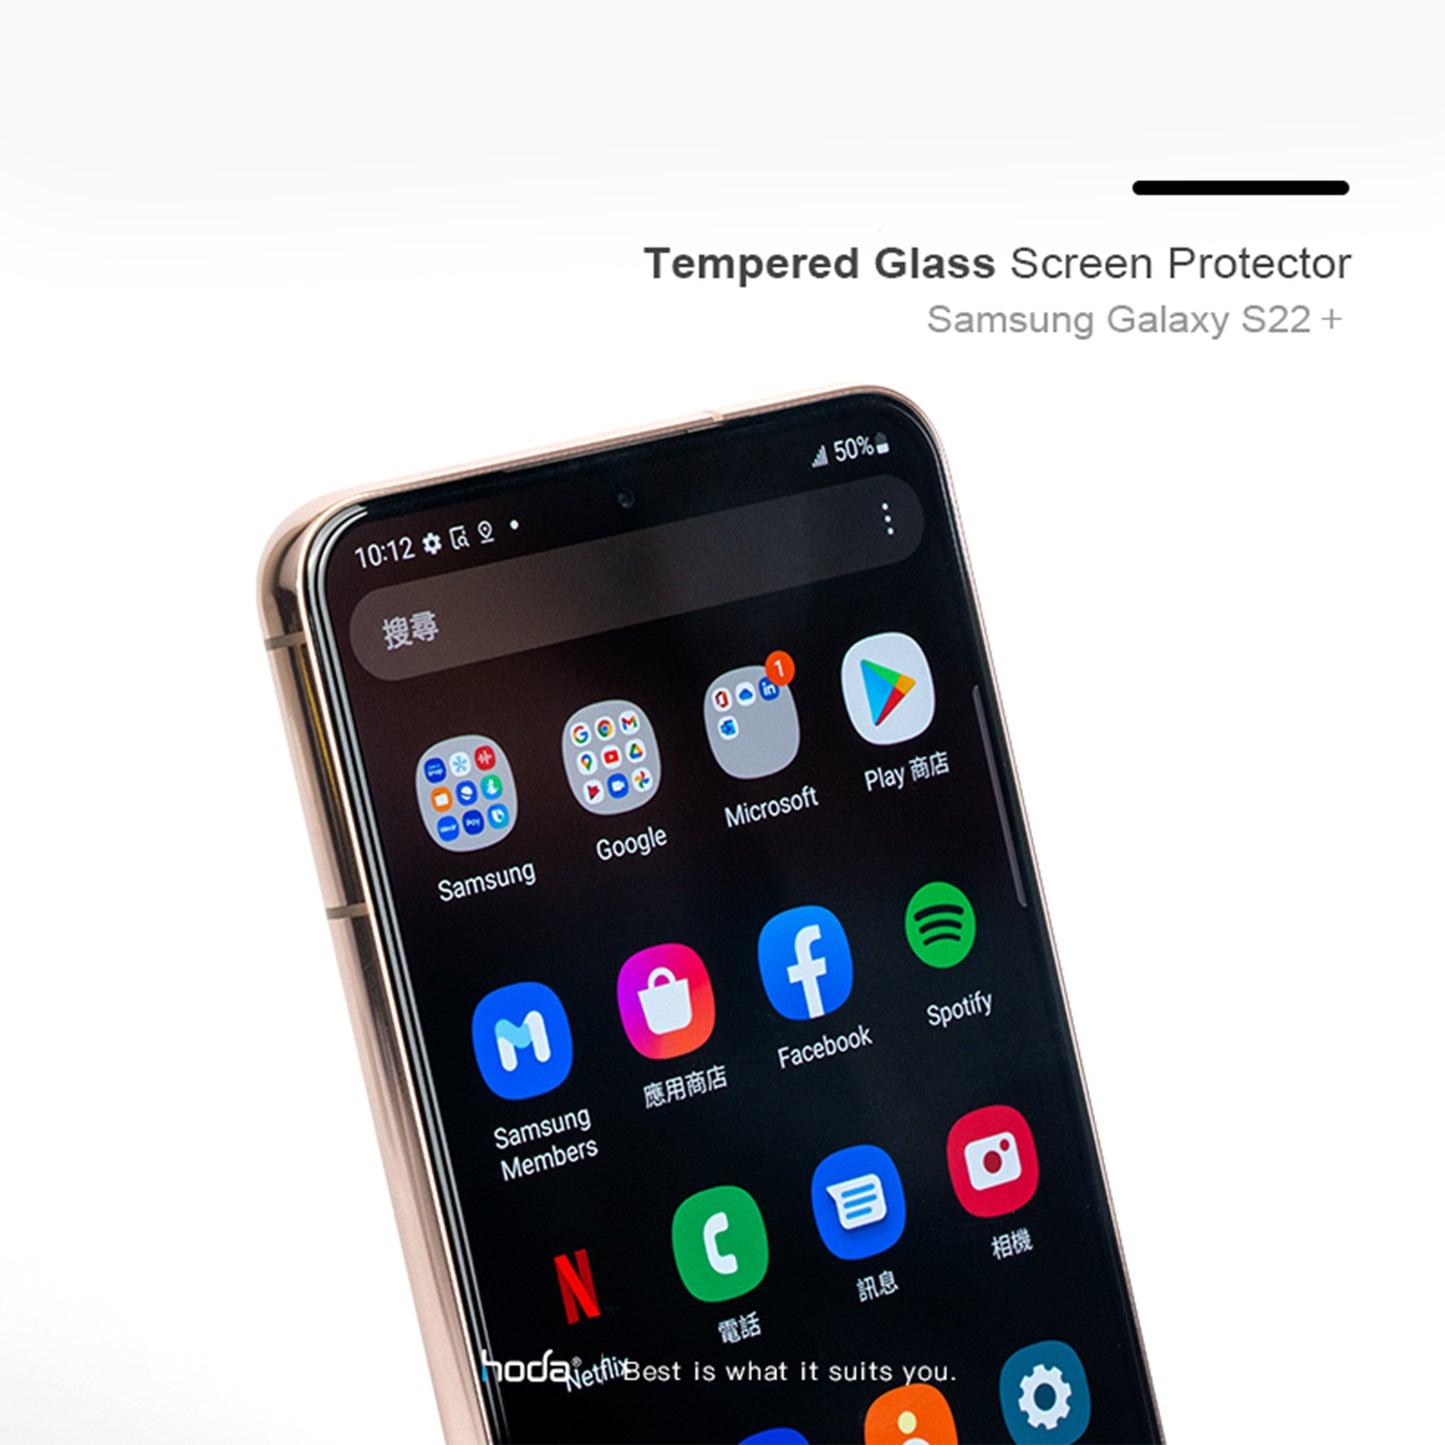 Hoda Tempered Glass for Samsung Galaxy S22 - 0.21mm 2.5D Full Coverage Screen Protector - Clear (Barcode: 4711103544129 )